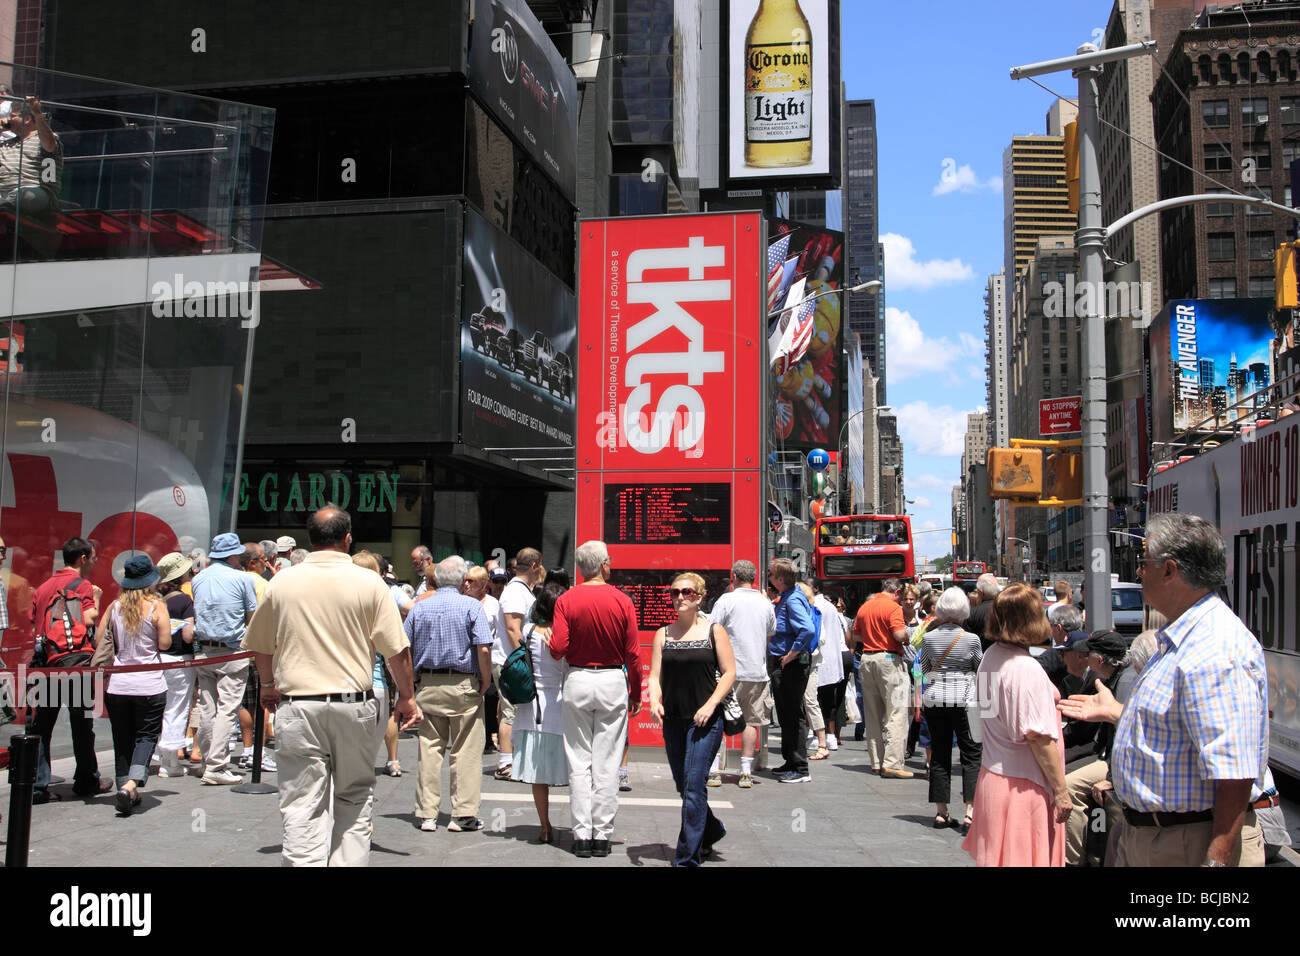 TKTS booth offering discounted tickets to Broadway shows, Times Square, New York City USA Stock Photo